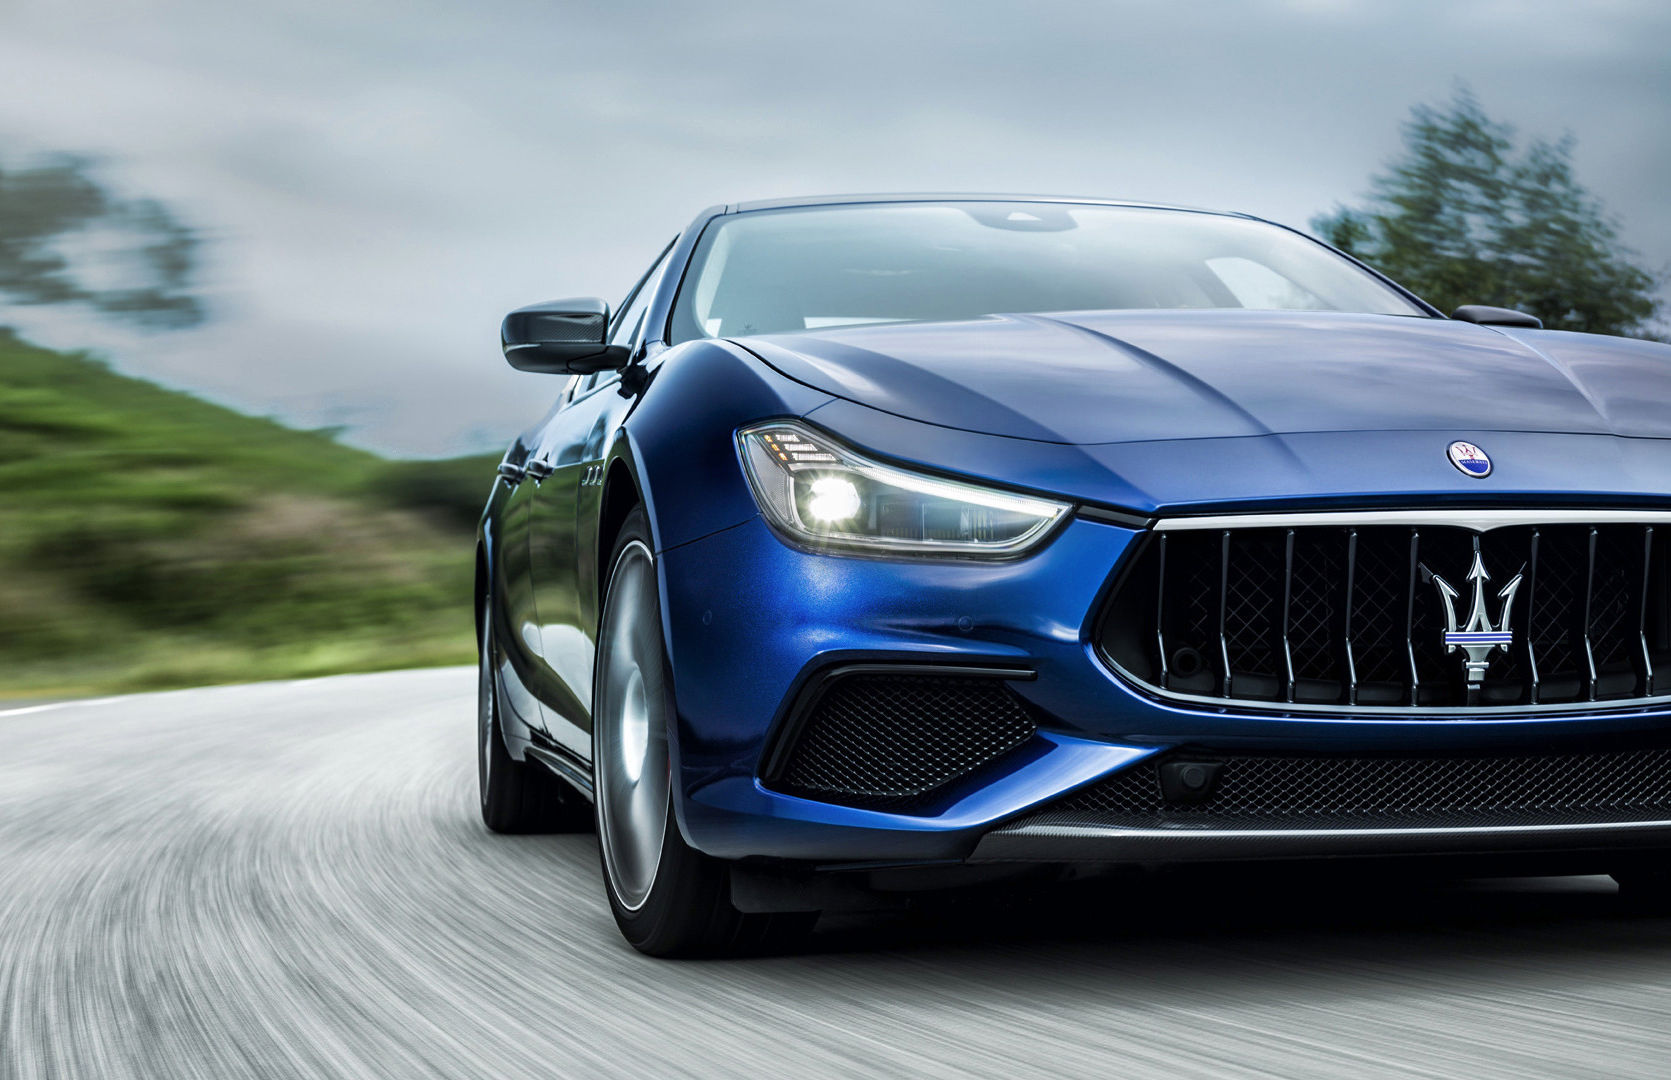 Maserati Ghibli GranSport - front view and lights, blue version